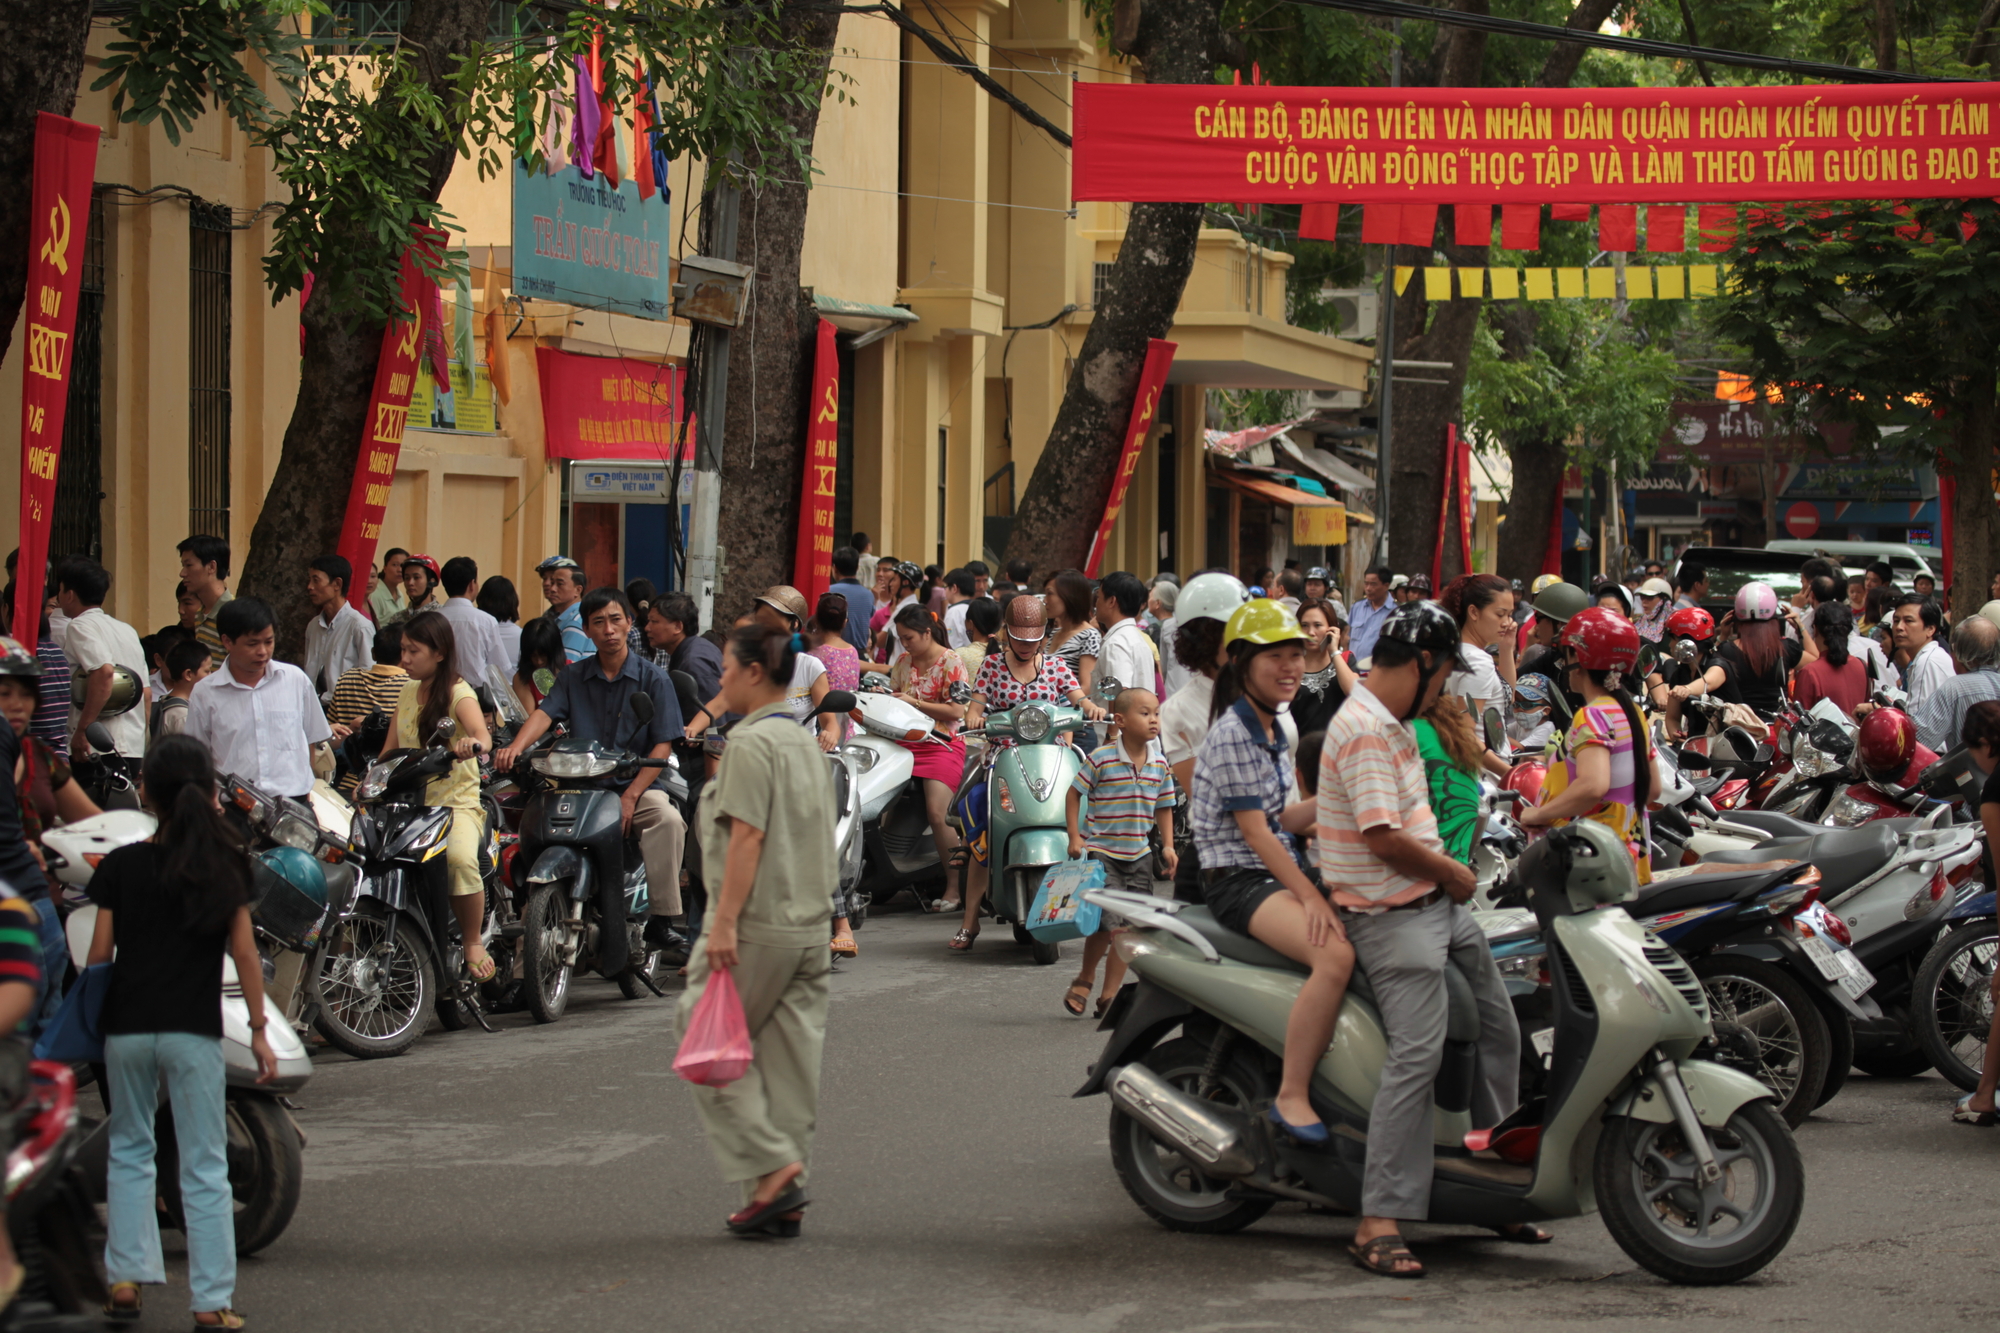 Crossing the road in Ho Chi Minh City, Vietnam 